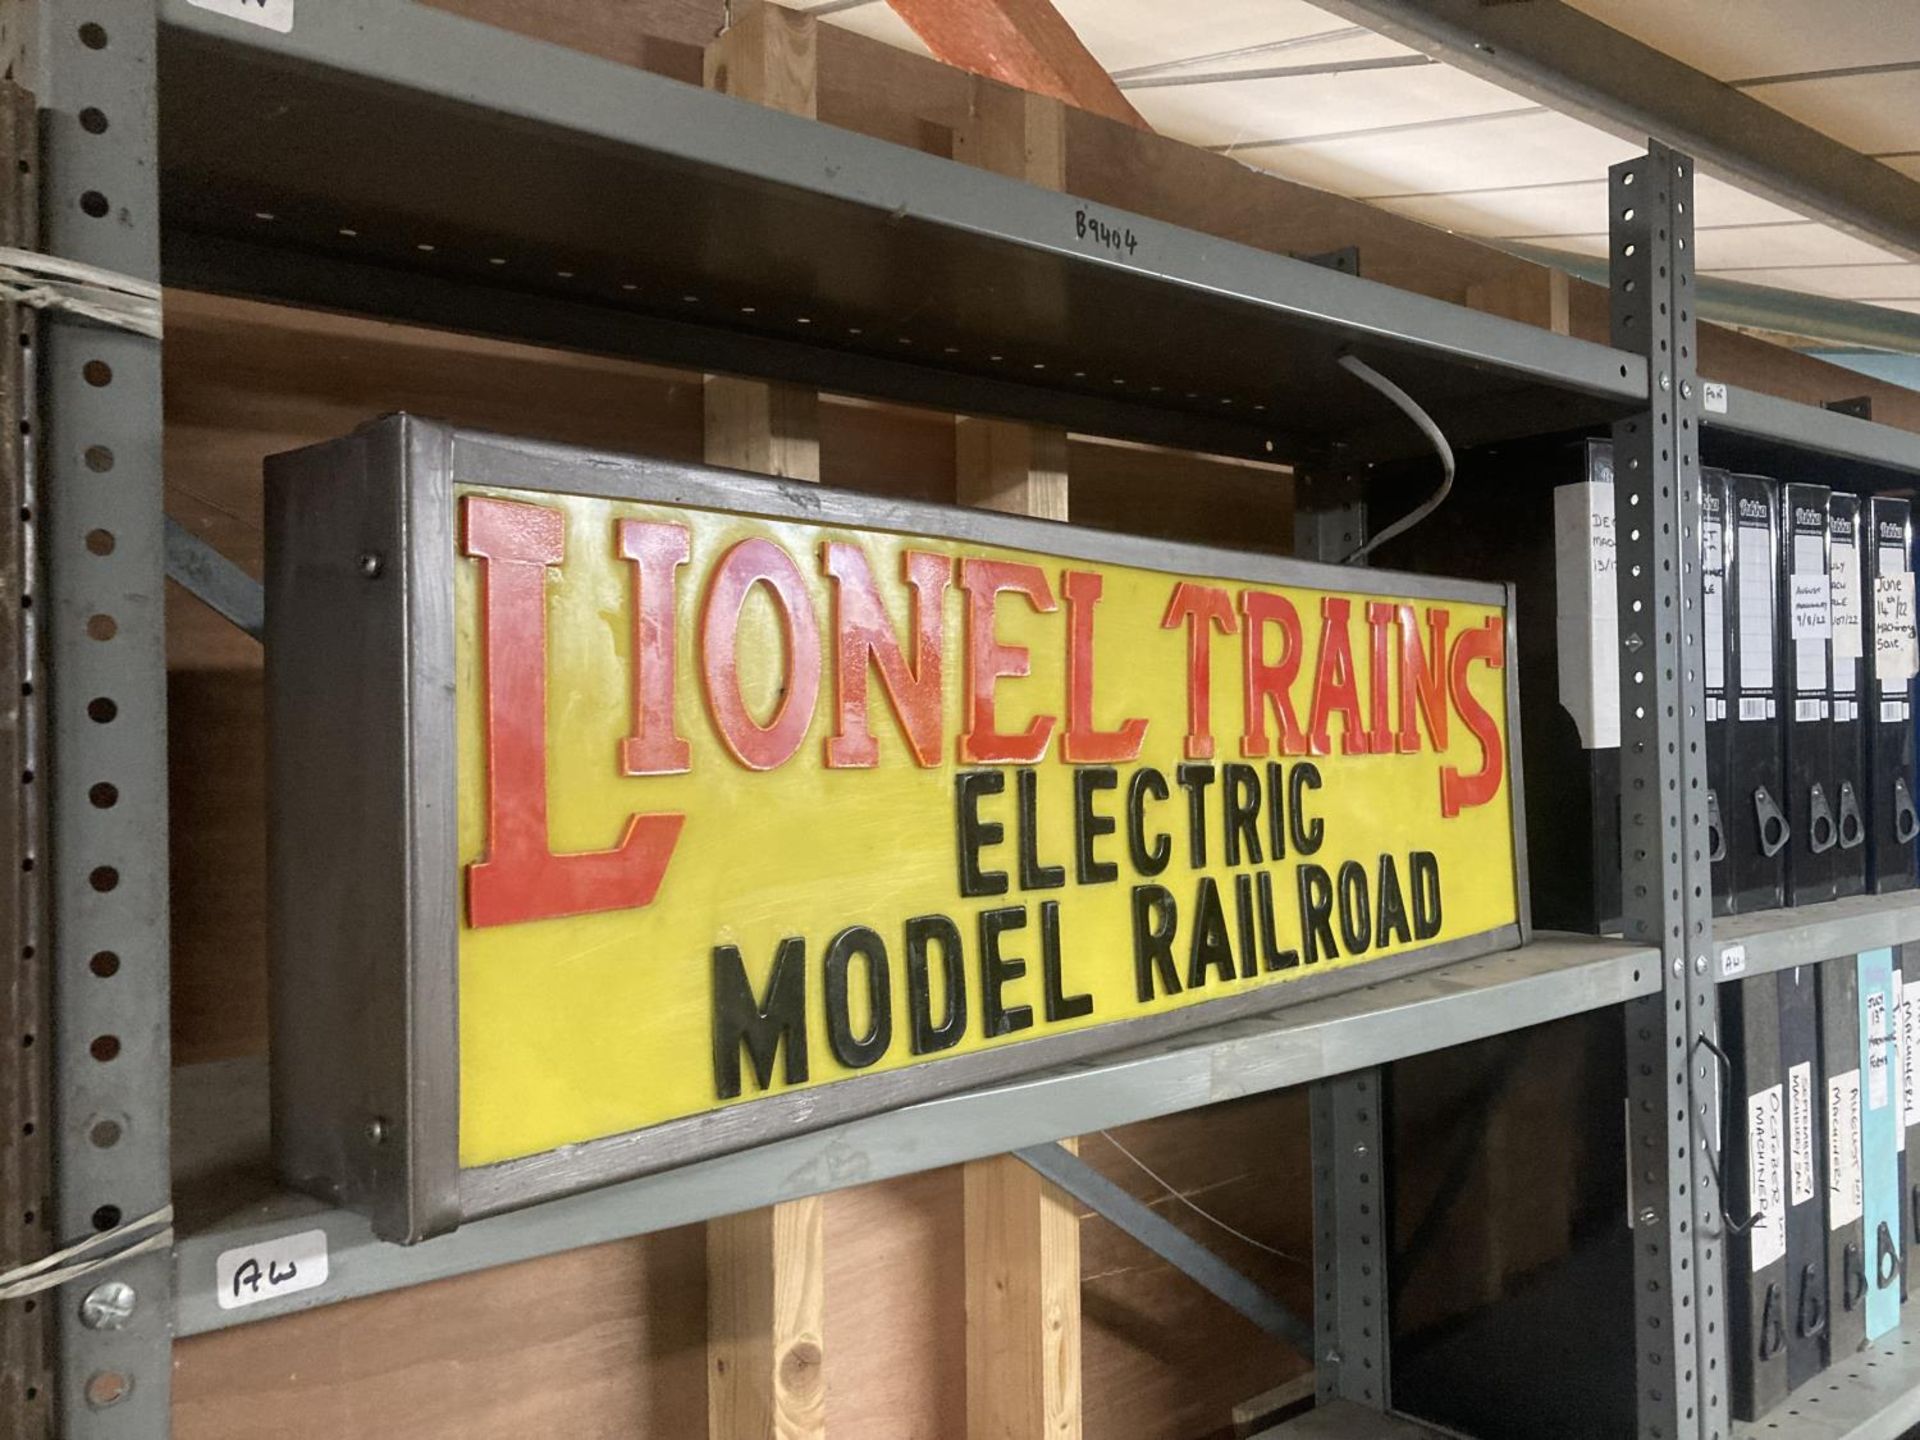 A LIONEL TRAINS ELECTRIC MODEL RAILROAD ILLUMINATED LIGHTBOX SIGN - Image 2 of 4